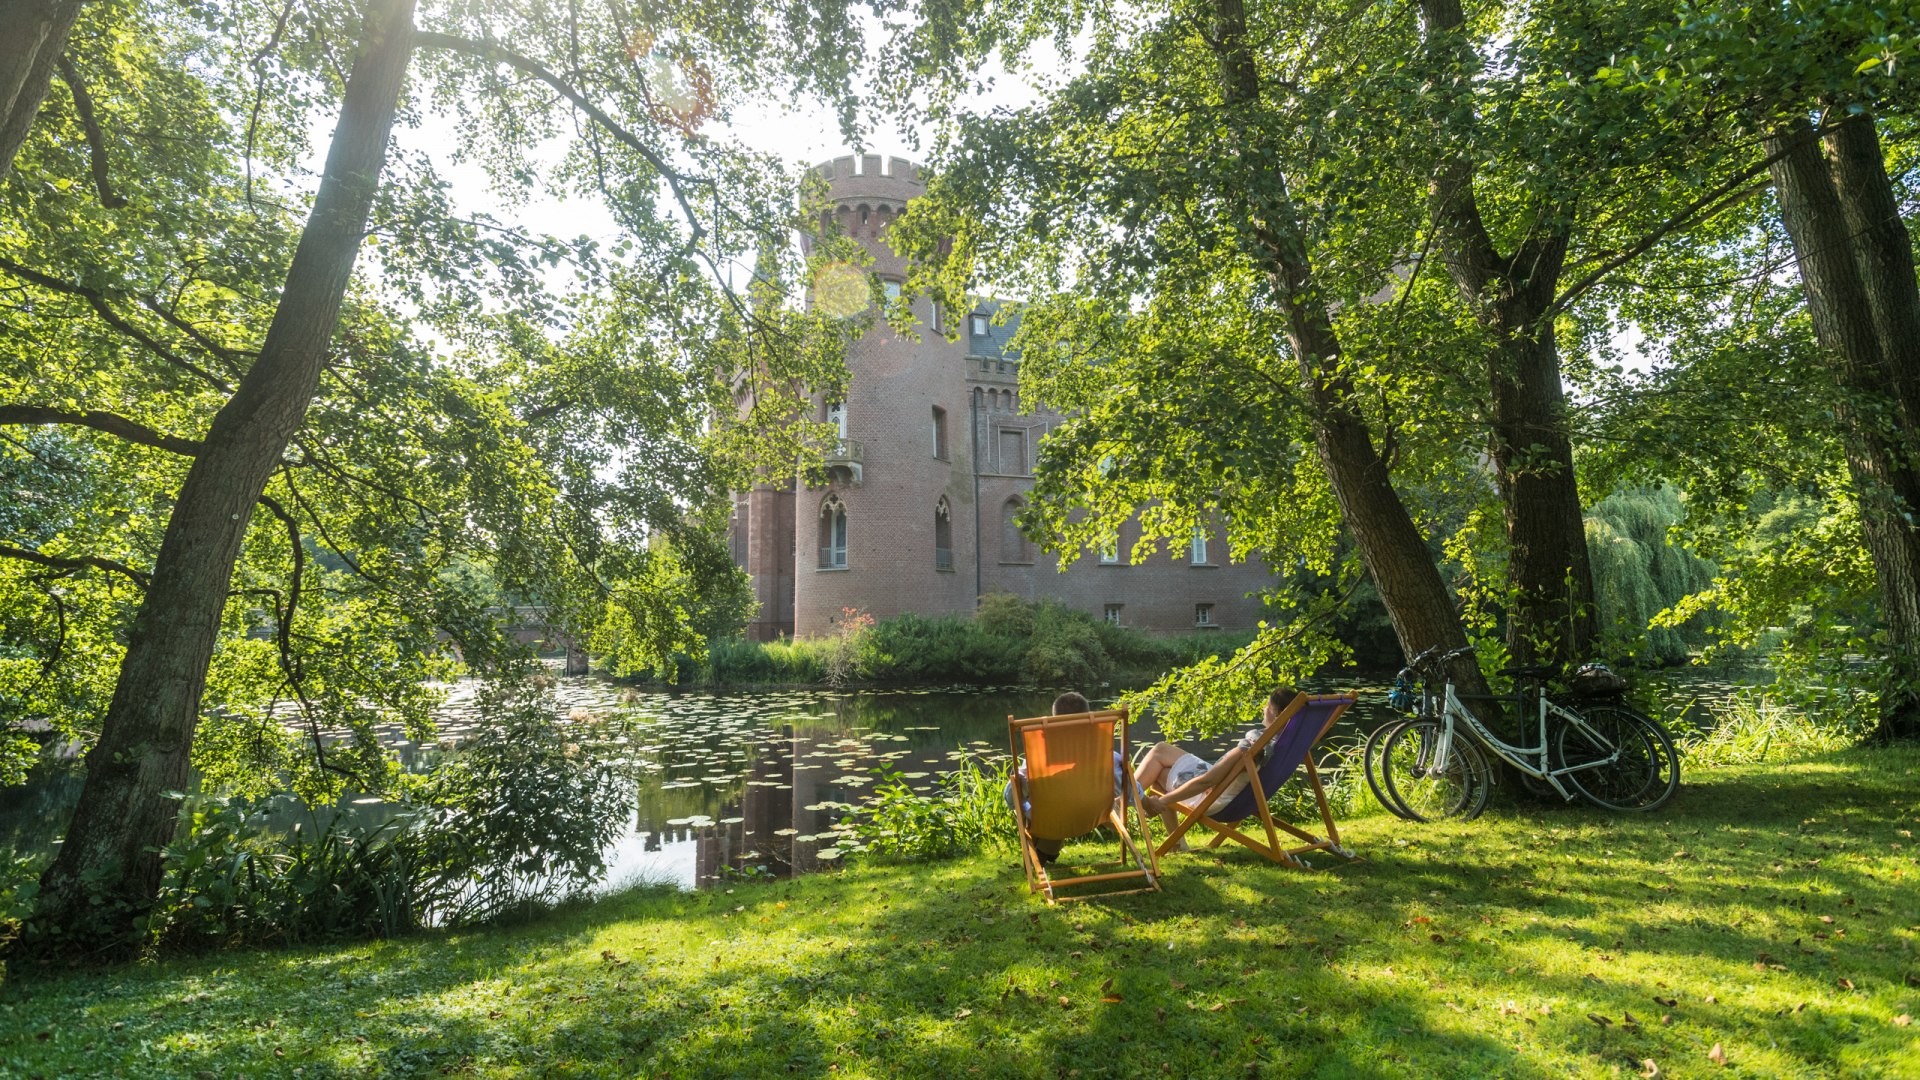 Break at Moyland Castle while cycling on the Rhine Cycle Route, © Dominik Ketz, Tourismus NRW e.V. 